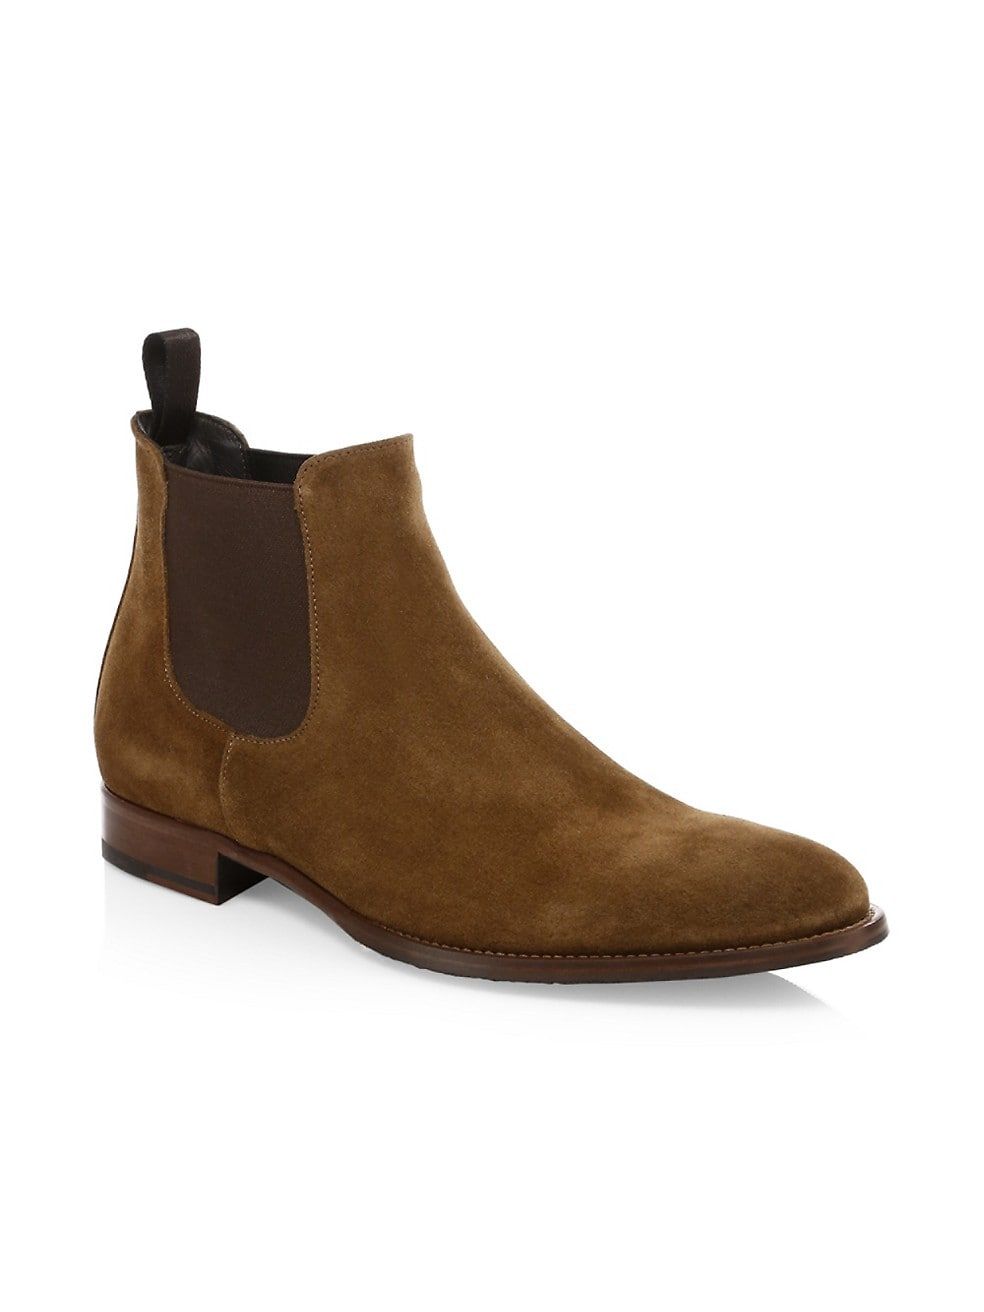 To Boot New York Shelby Suede Chelsea Boots | Saks Fifth Avenue